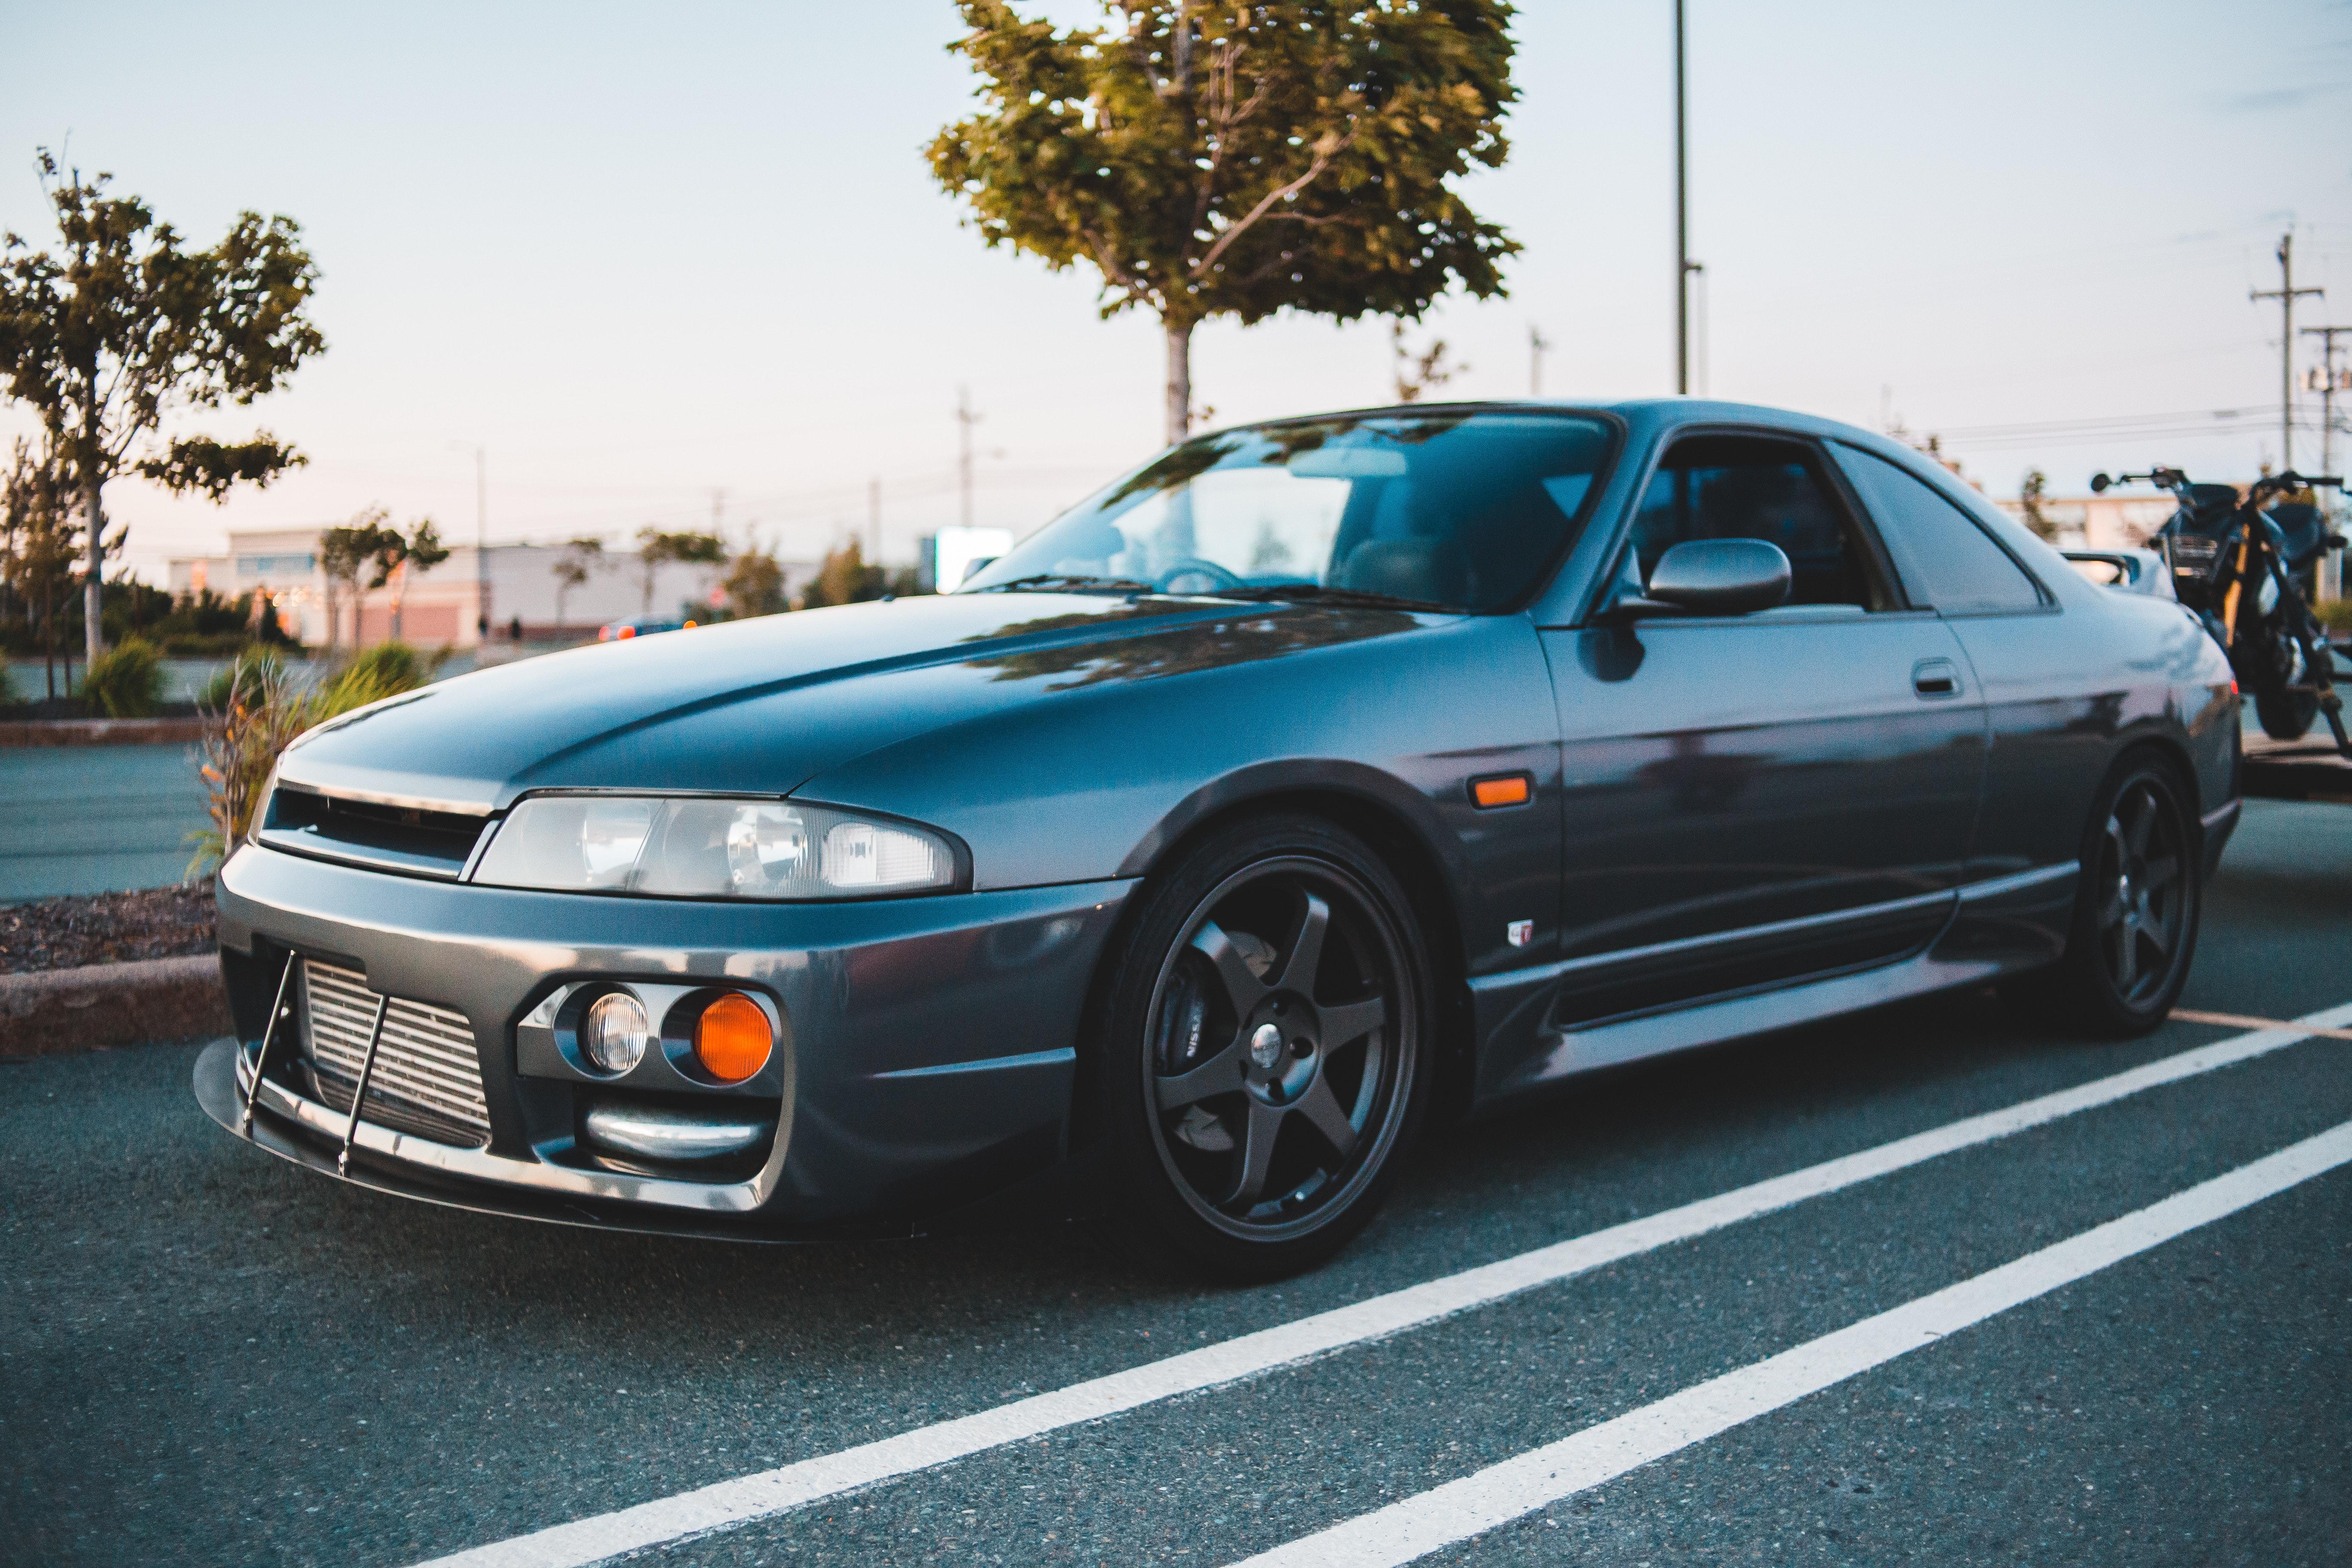 Are skylines expensive?